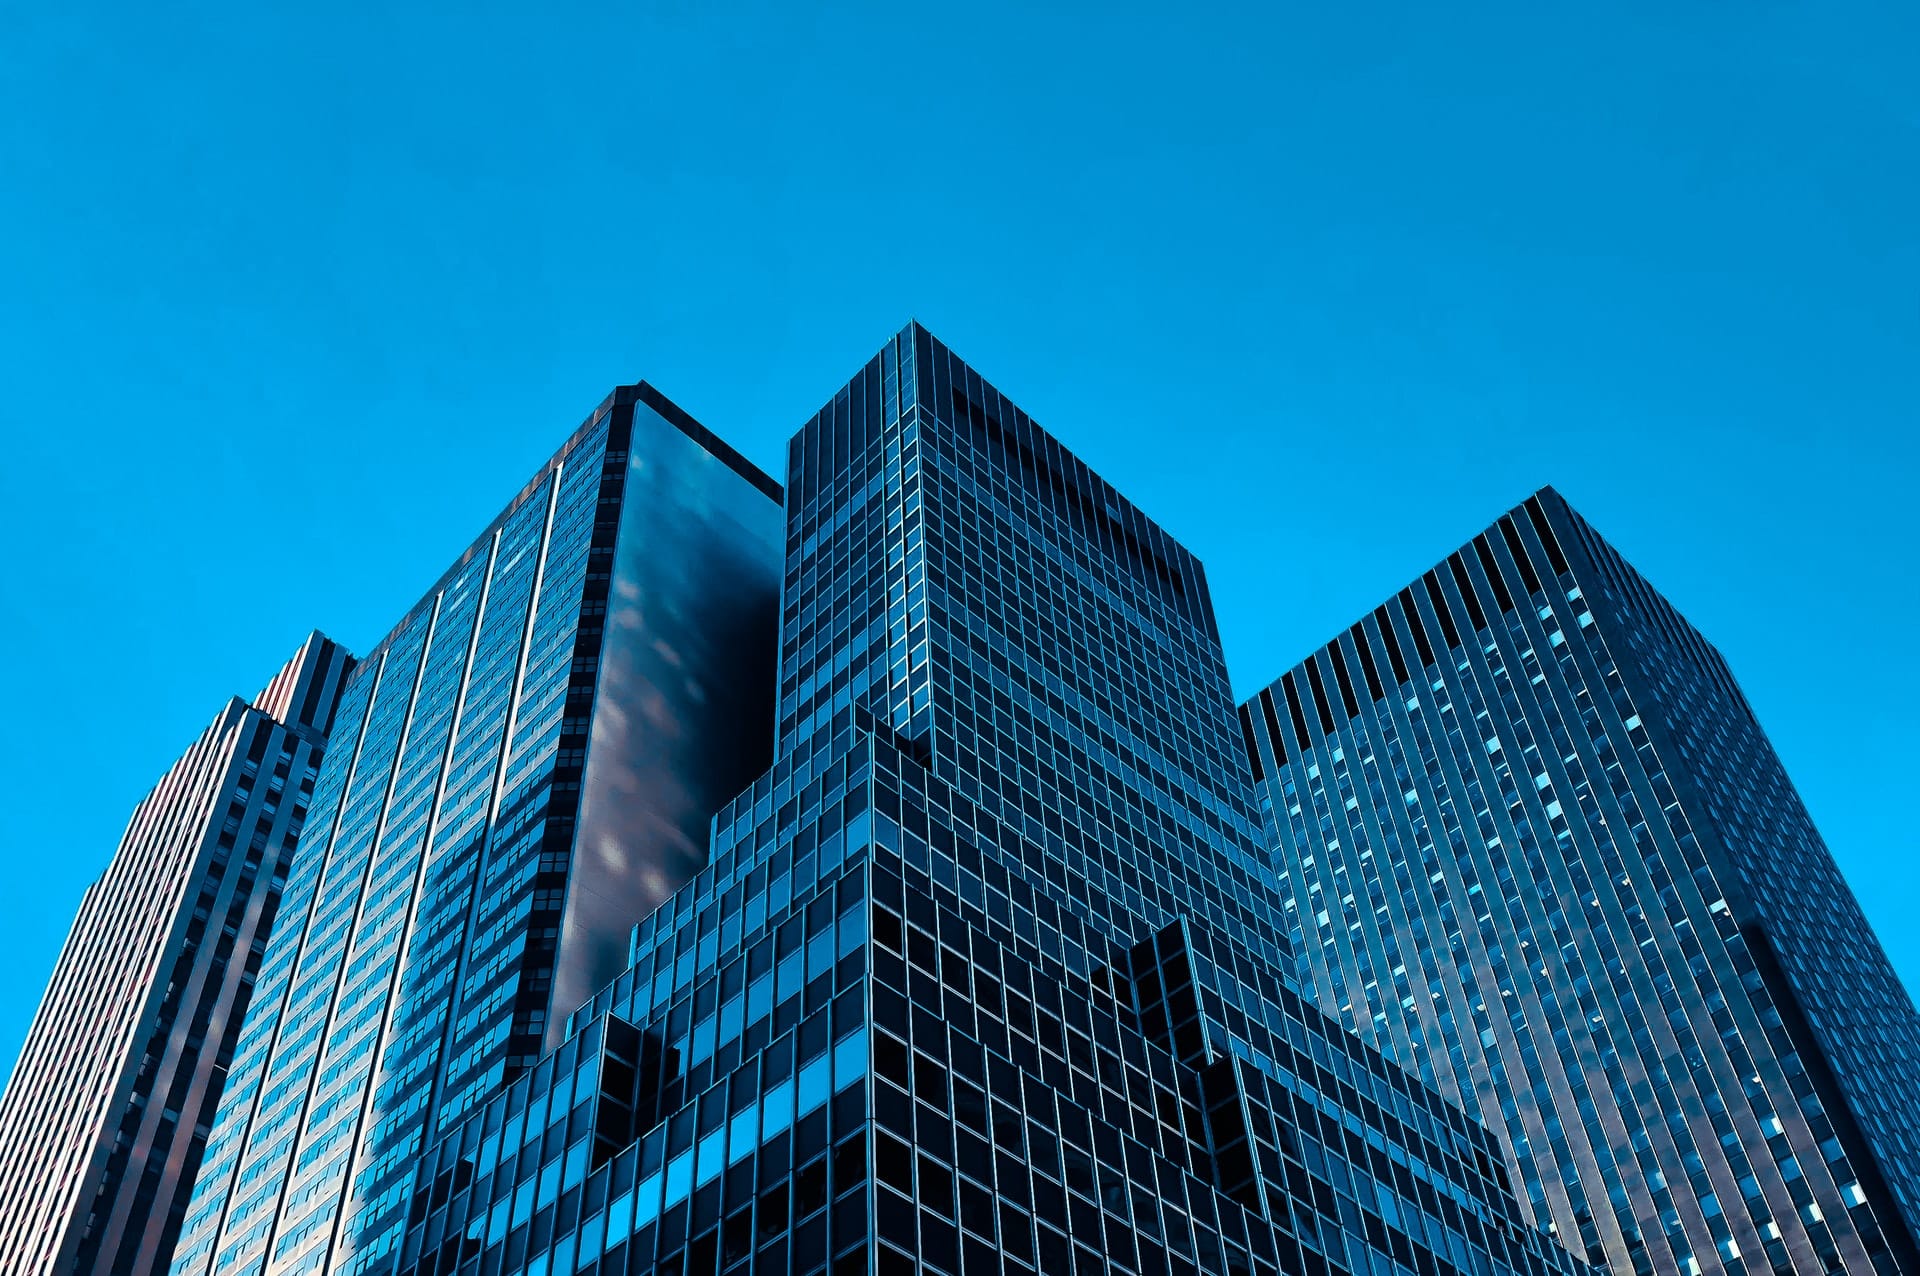 Image shows skyscrapers against a blue sky, illustrating the concept of companies applying ESG standards.